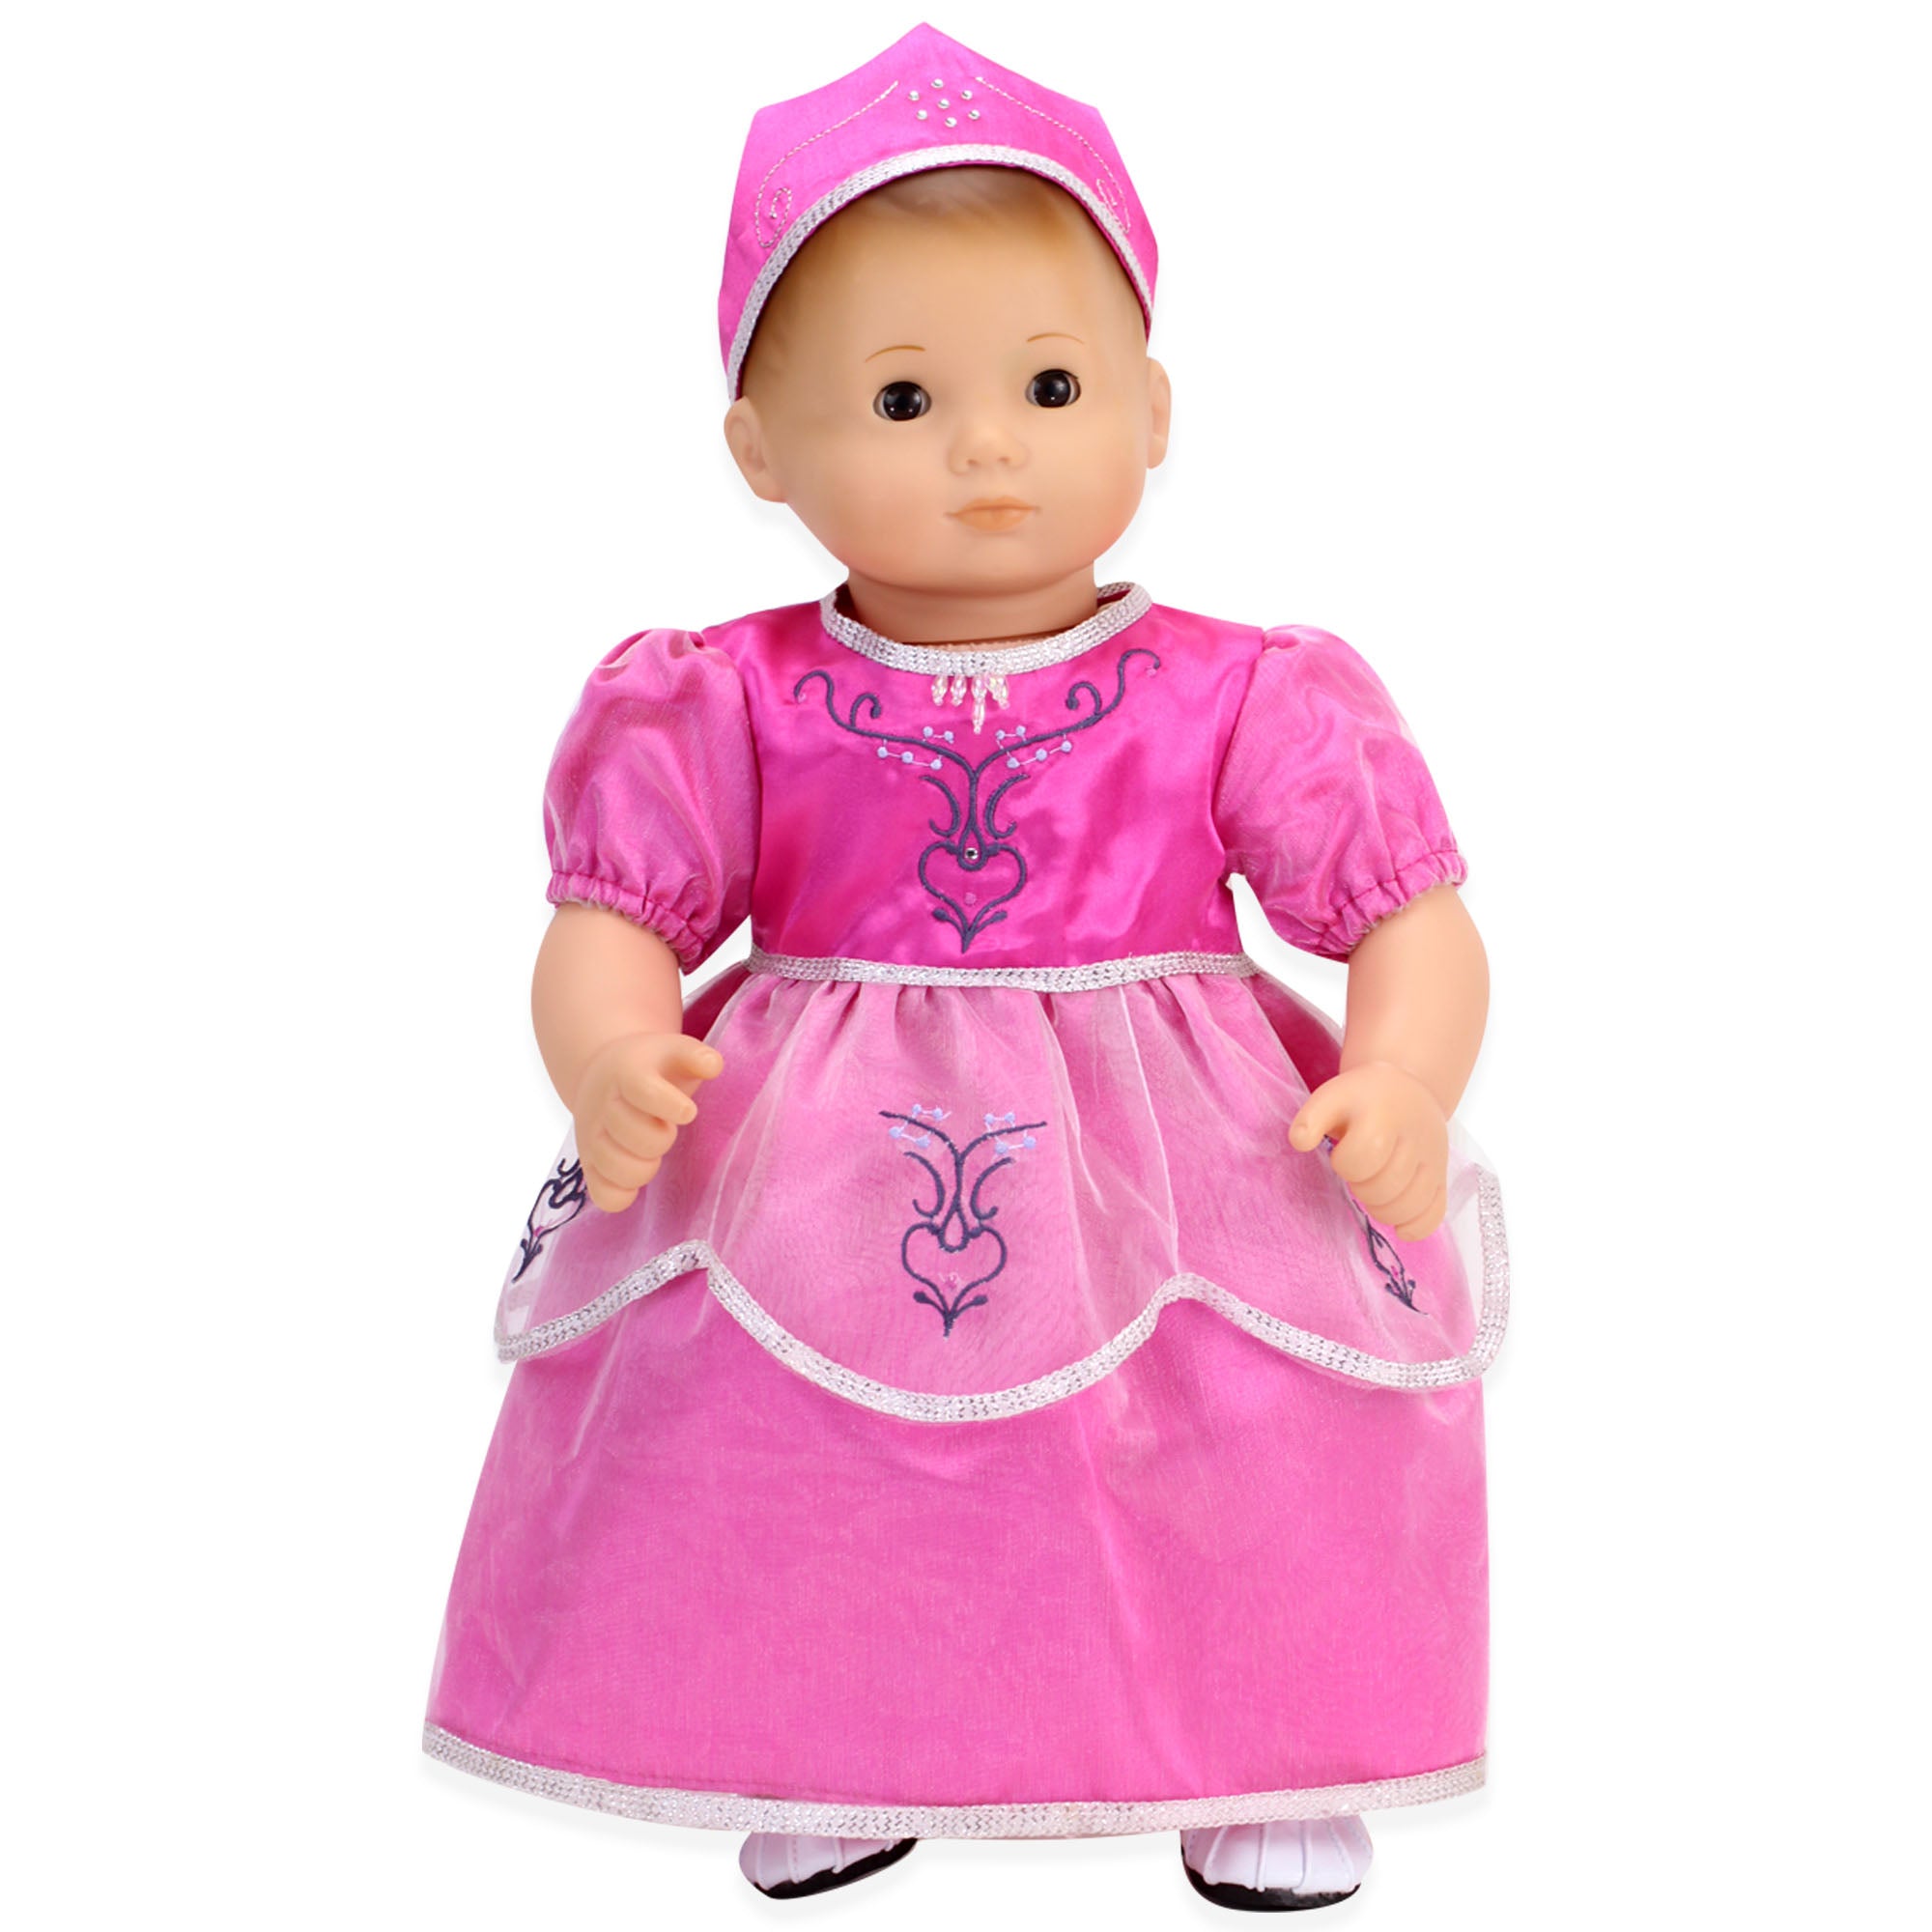 Sophia’s Princess Dress & Matching Crown Costume Set for 15” Baby Dolls, Hot Pink